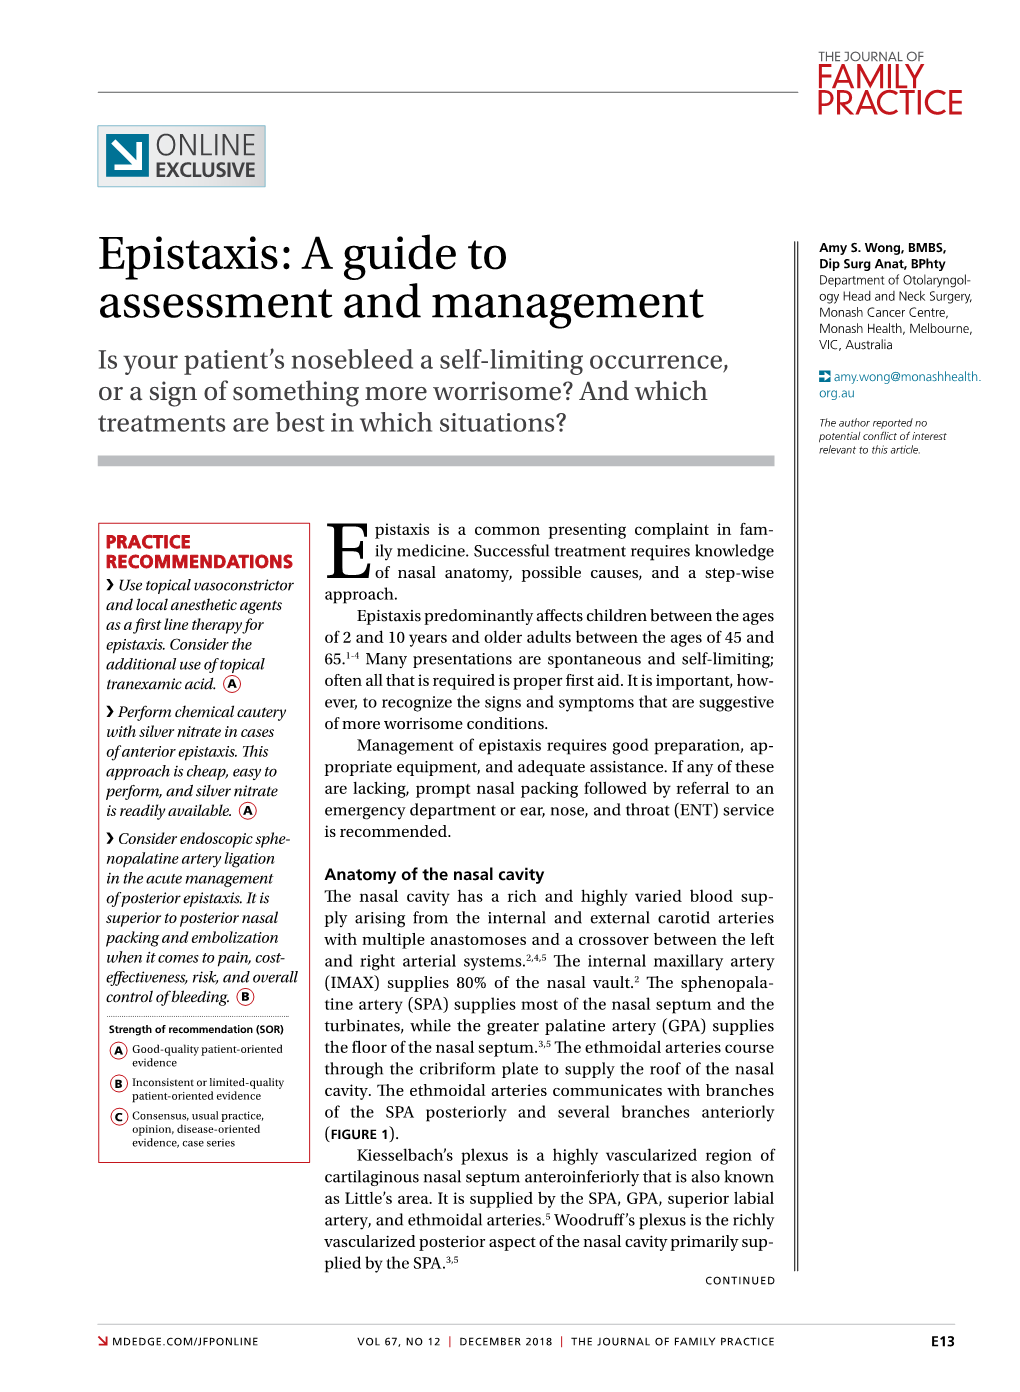 Epistaxis: a Guide to Assessment and Management